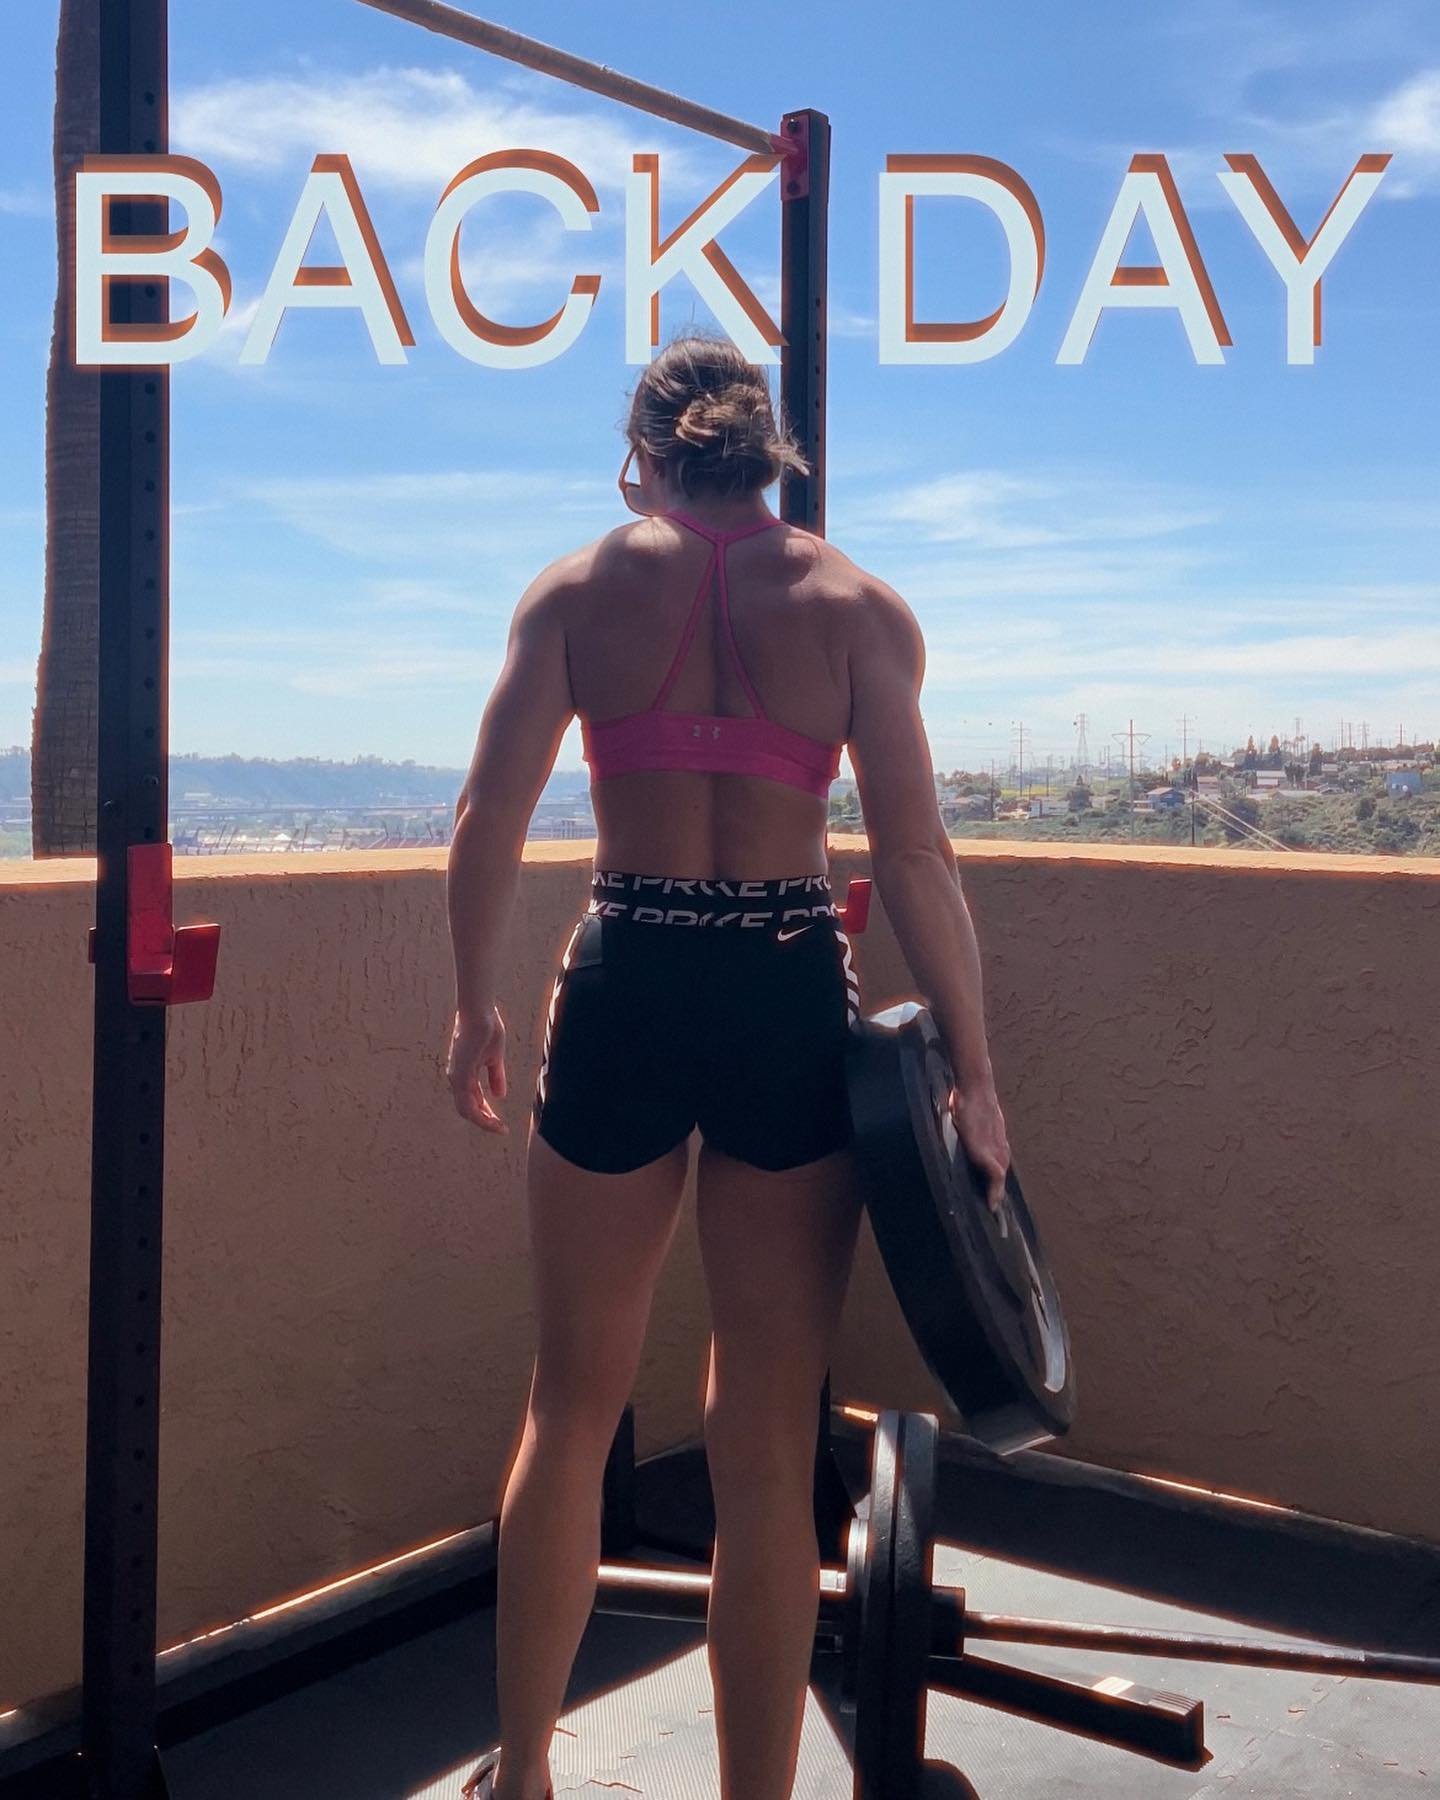 5️⃣ exercises I love on back day ➡️
1 ⭐️ landmine side arm row
2 ⭐️ pendlay rows
3 ⭐️ landmine tbar row
4 ⭐️ landmine wide row
5 ⭐️ negative pull-ups

🥵 other back day exercises that I added into this workout bc back day is my favorite 👉🏼 cable la